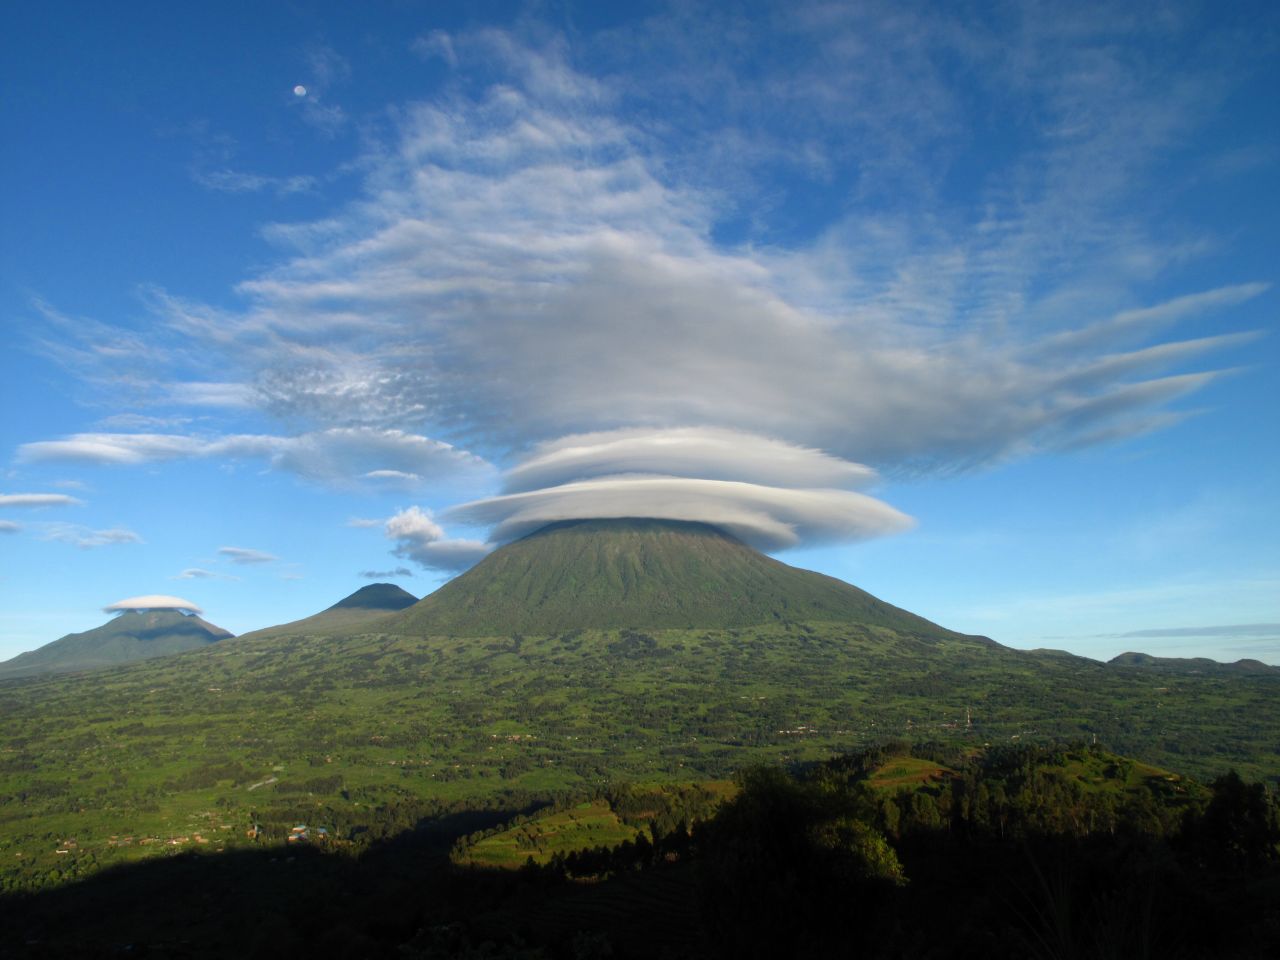 The curious cloud formations offer an interesting photo op. If you're hiking through the home of mountain gorillas in East Africa, Virunga can offer spectacular photos of the elusive endangered species. 